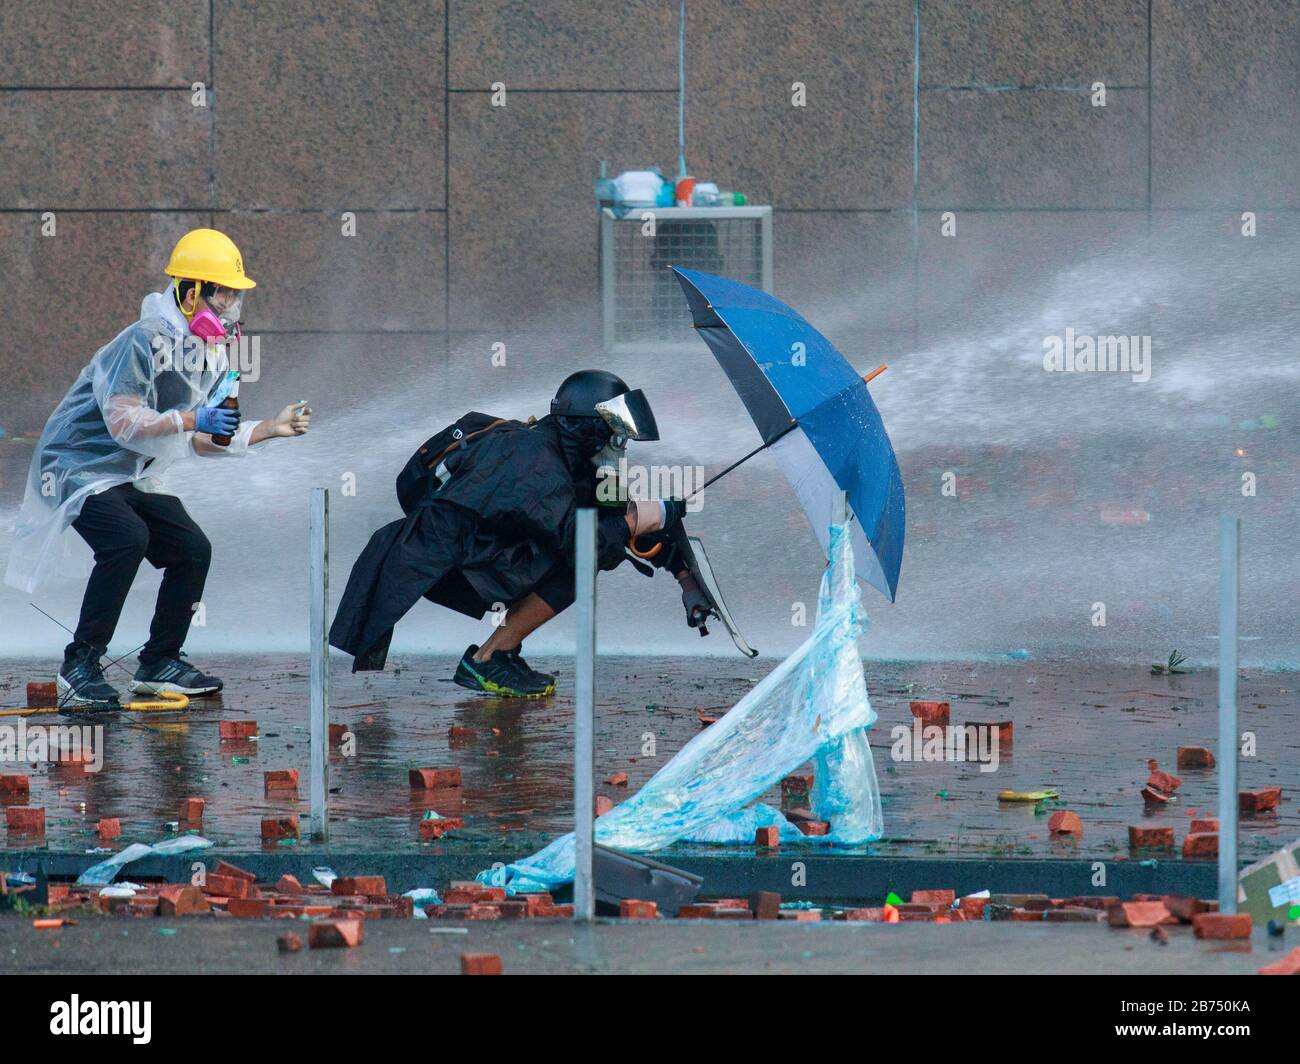 Protesters clash with police at the Hong Kong Polytechnic University. Stock Photo